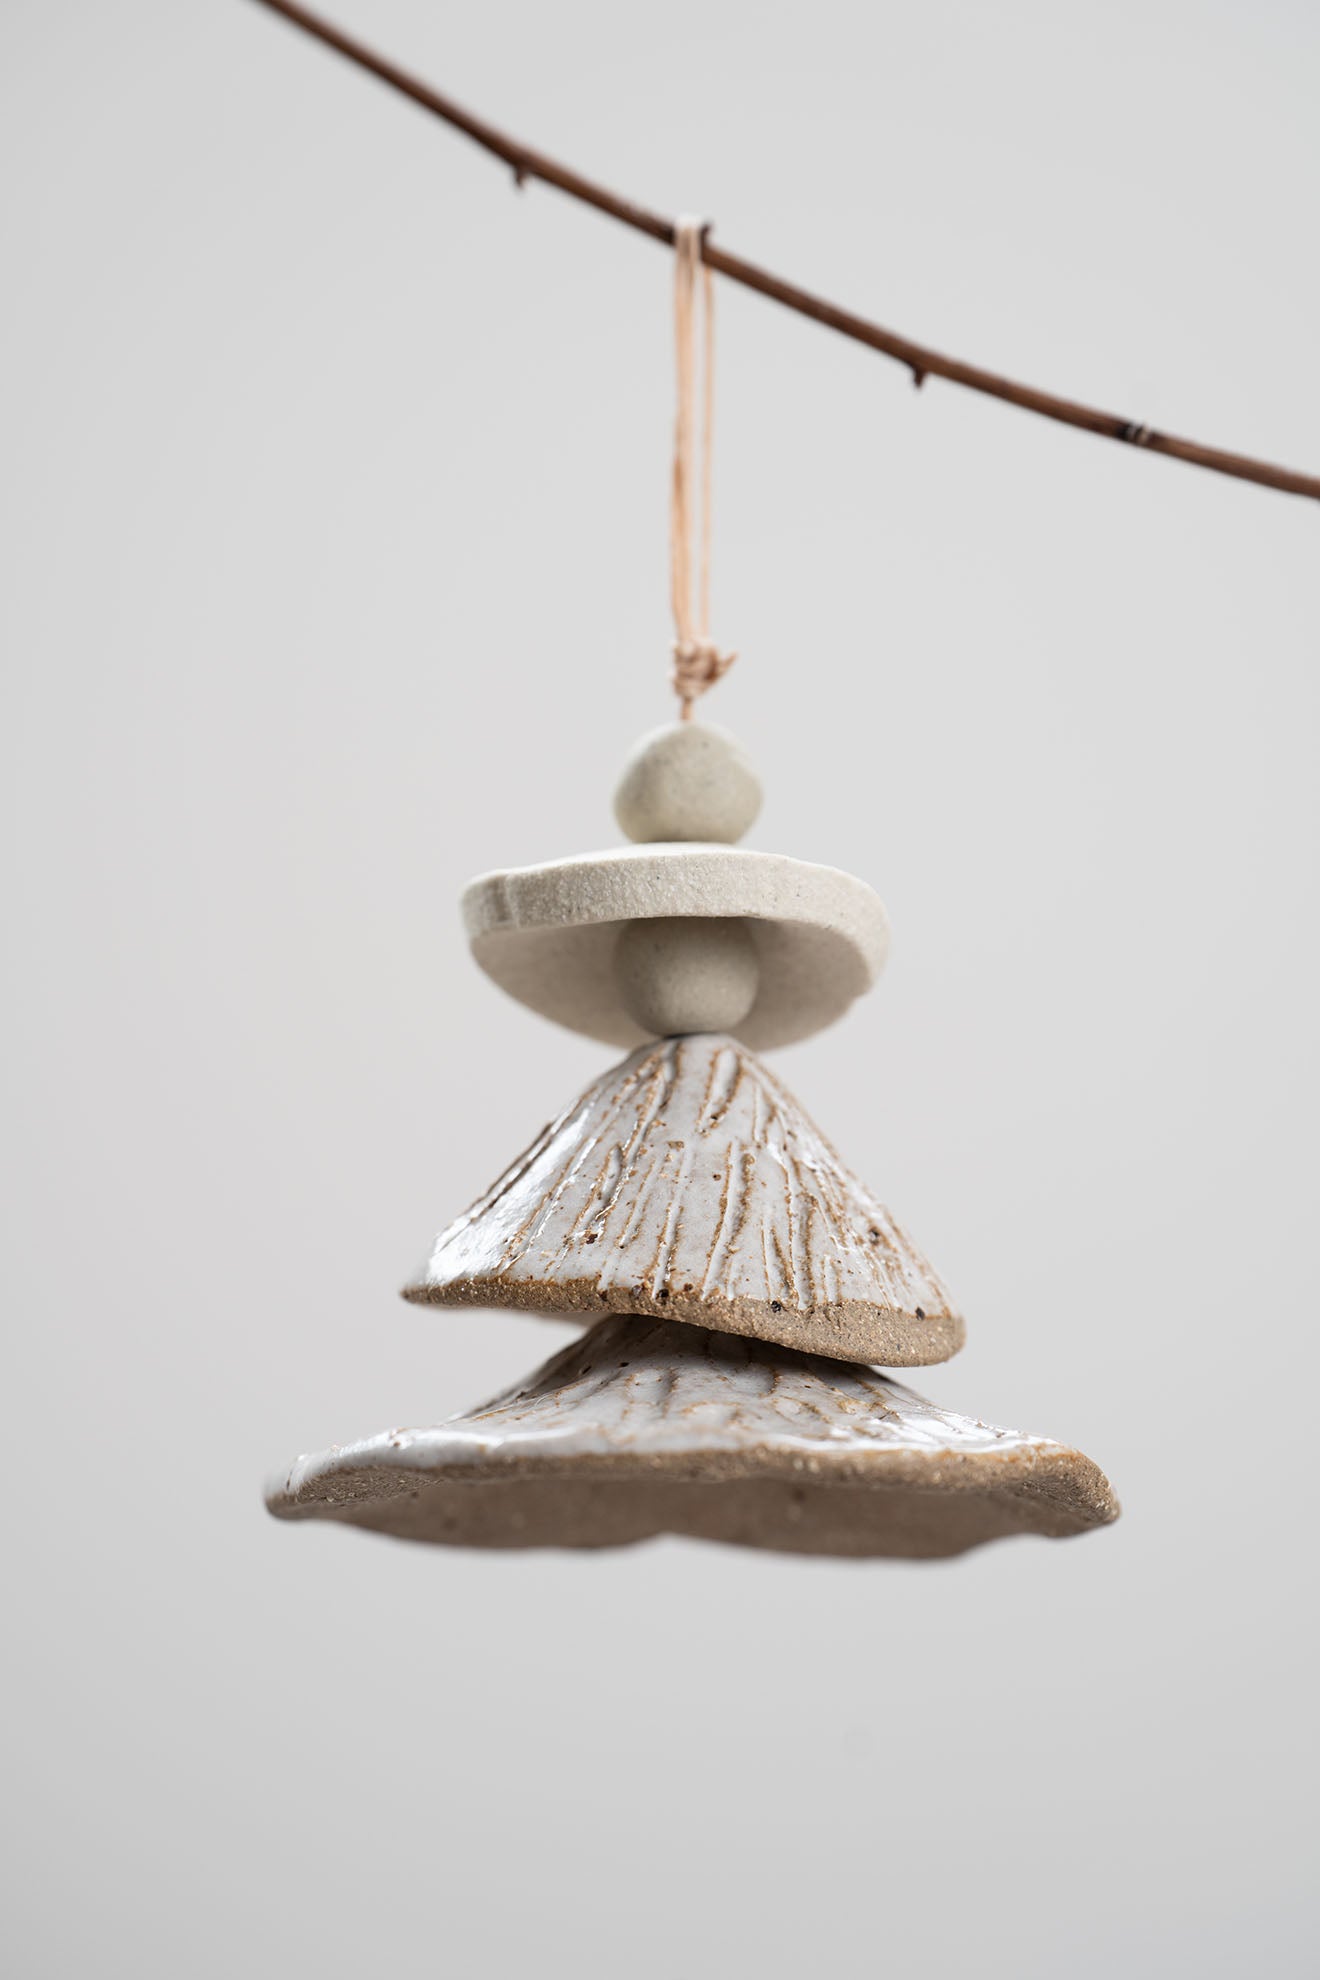 Layered tree bells - a hanging ornament for your Christmas tree or home